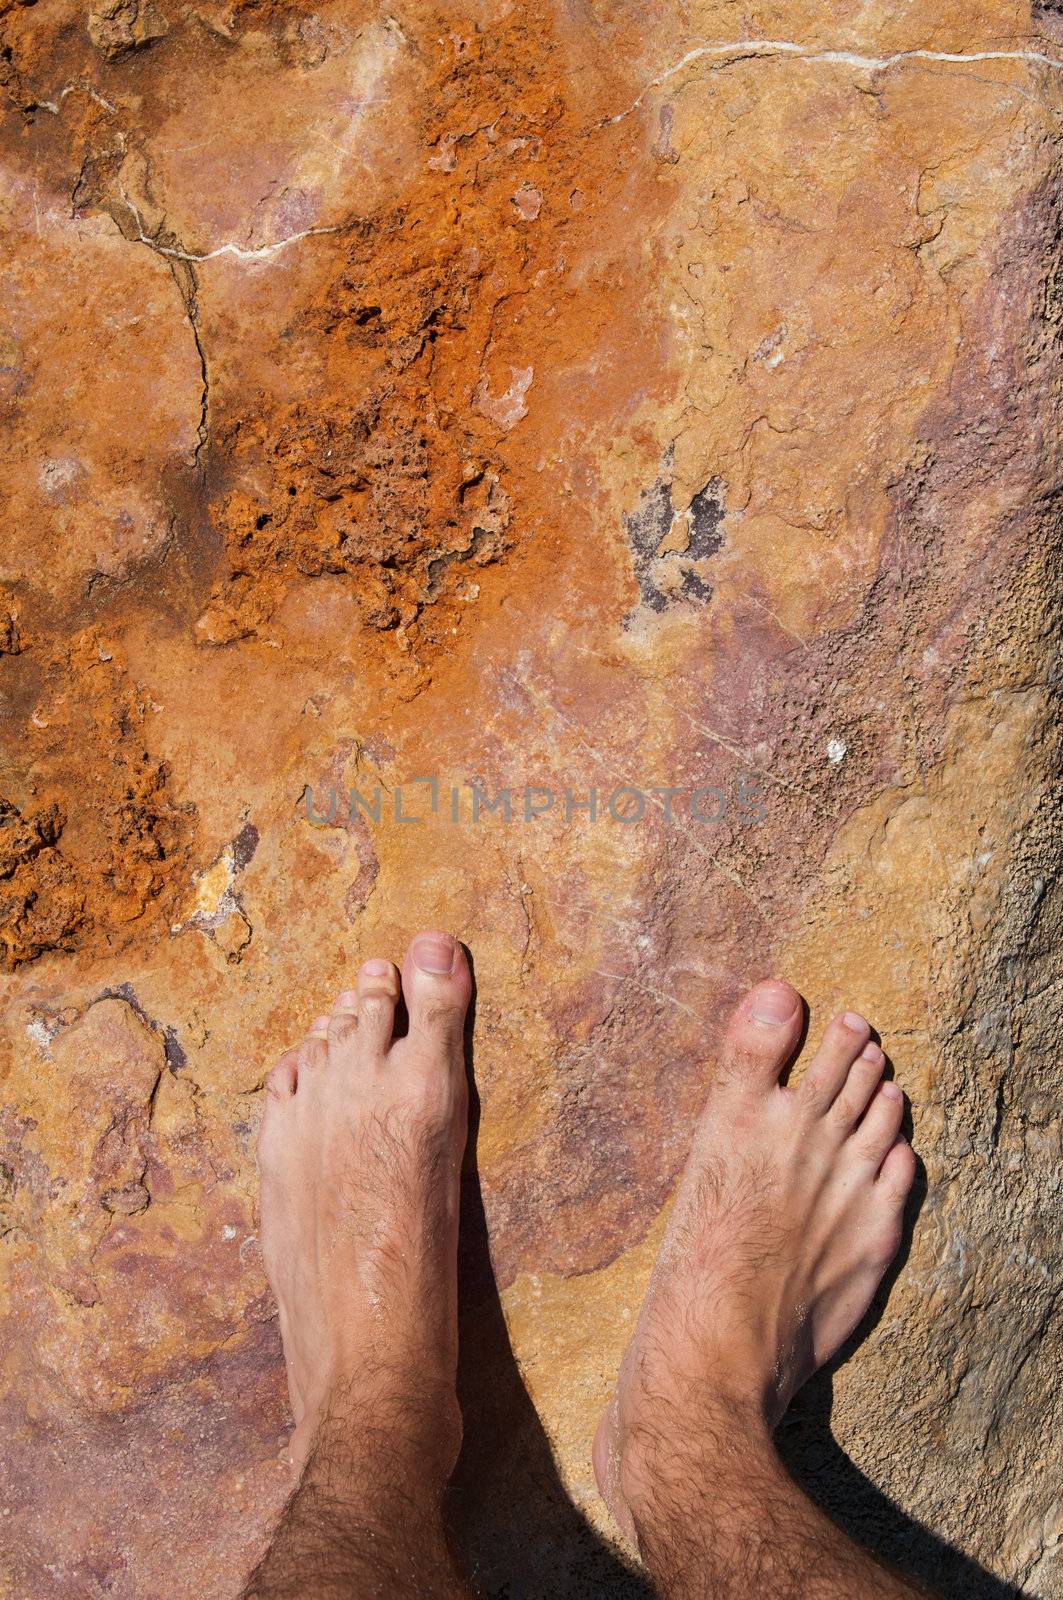 Barefoot on rock by luissantos84